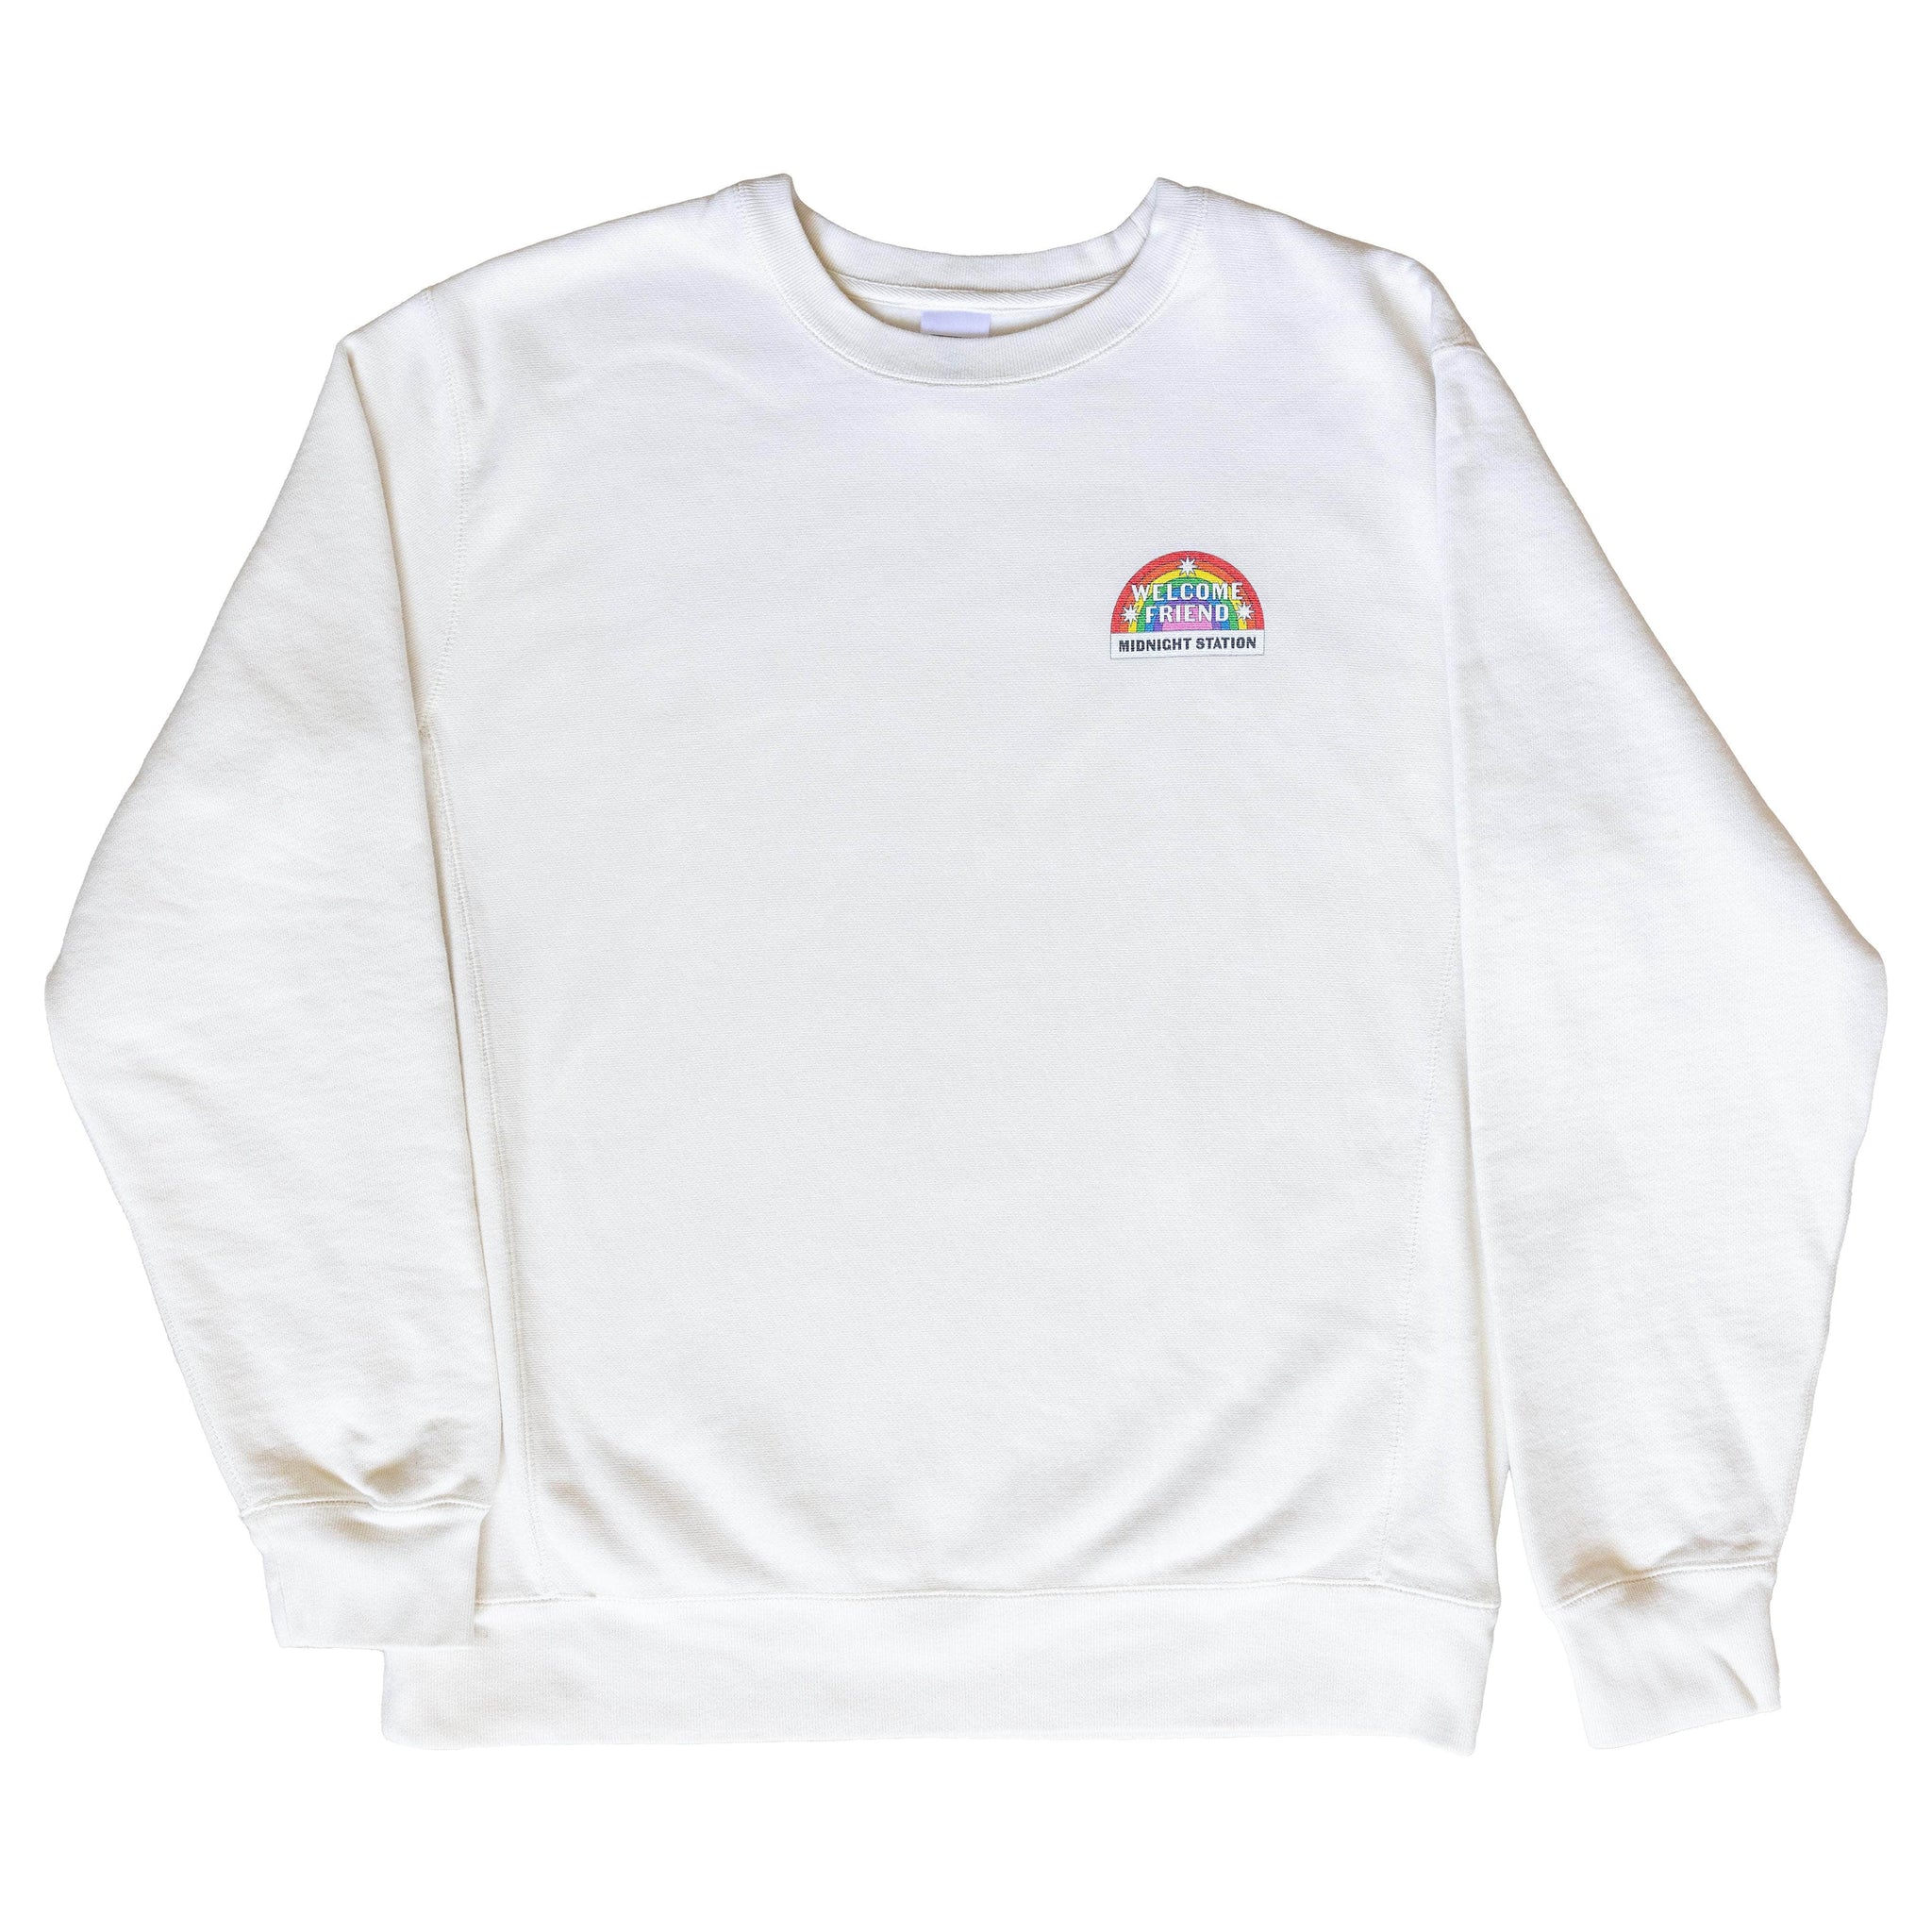 Welcome Friend Heavyweight Pullover